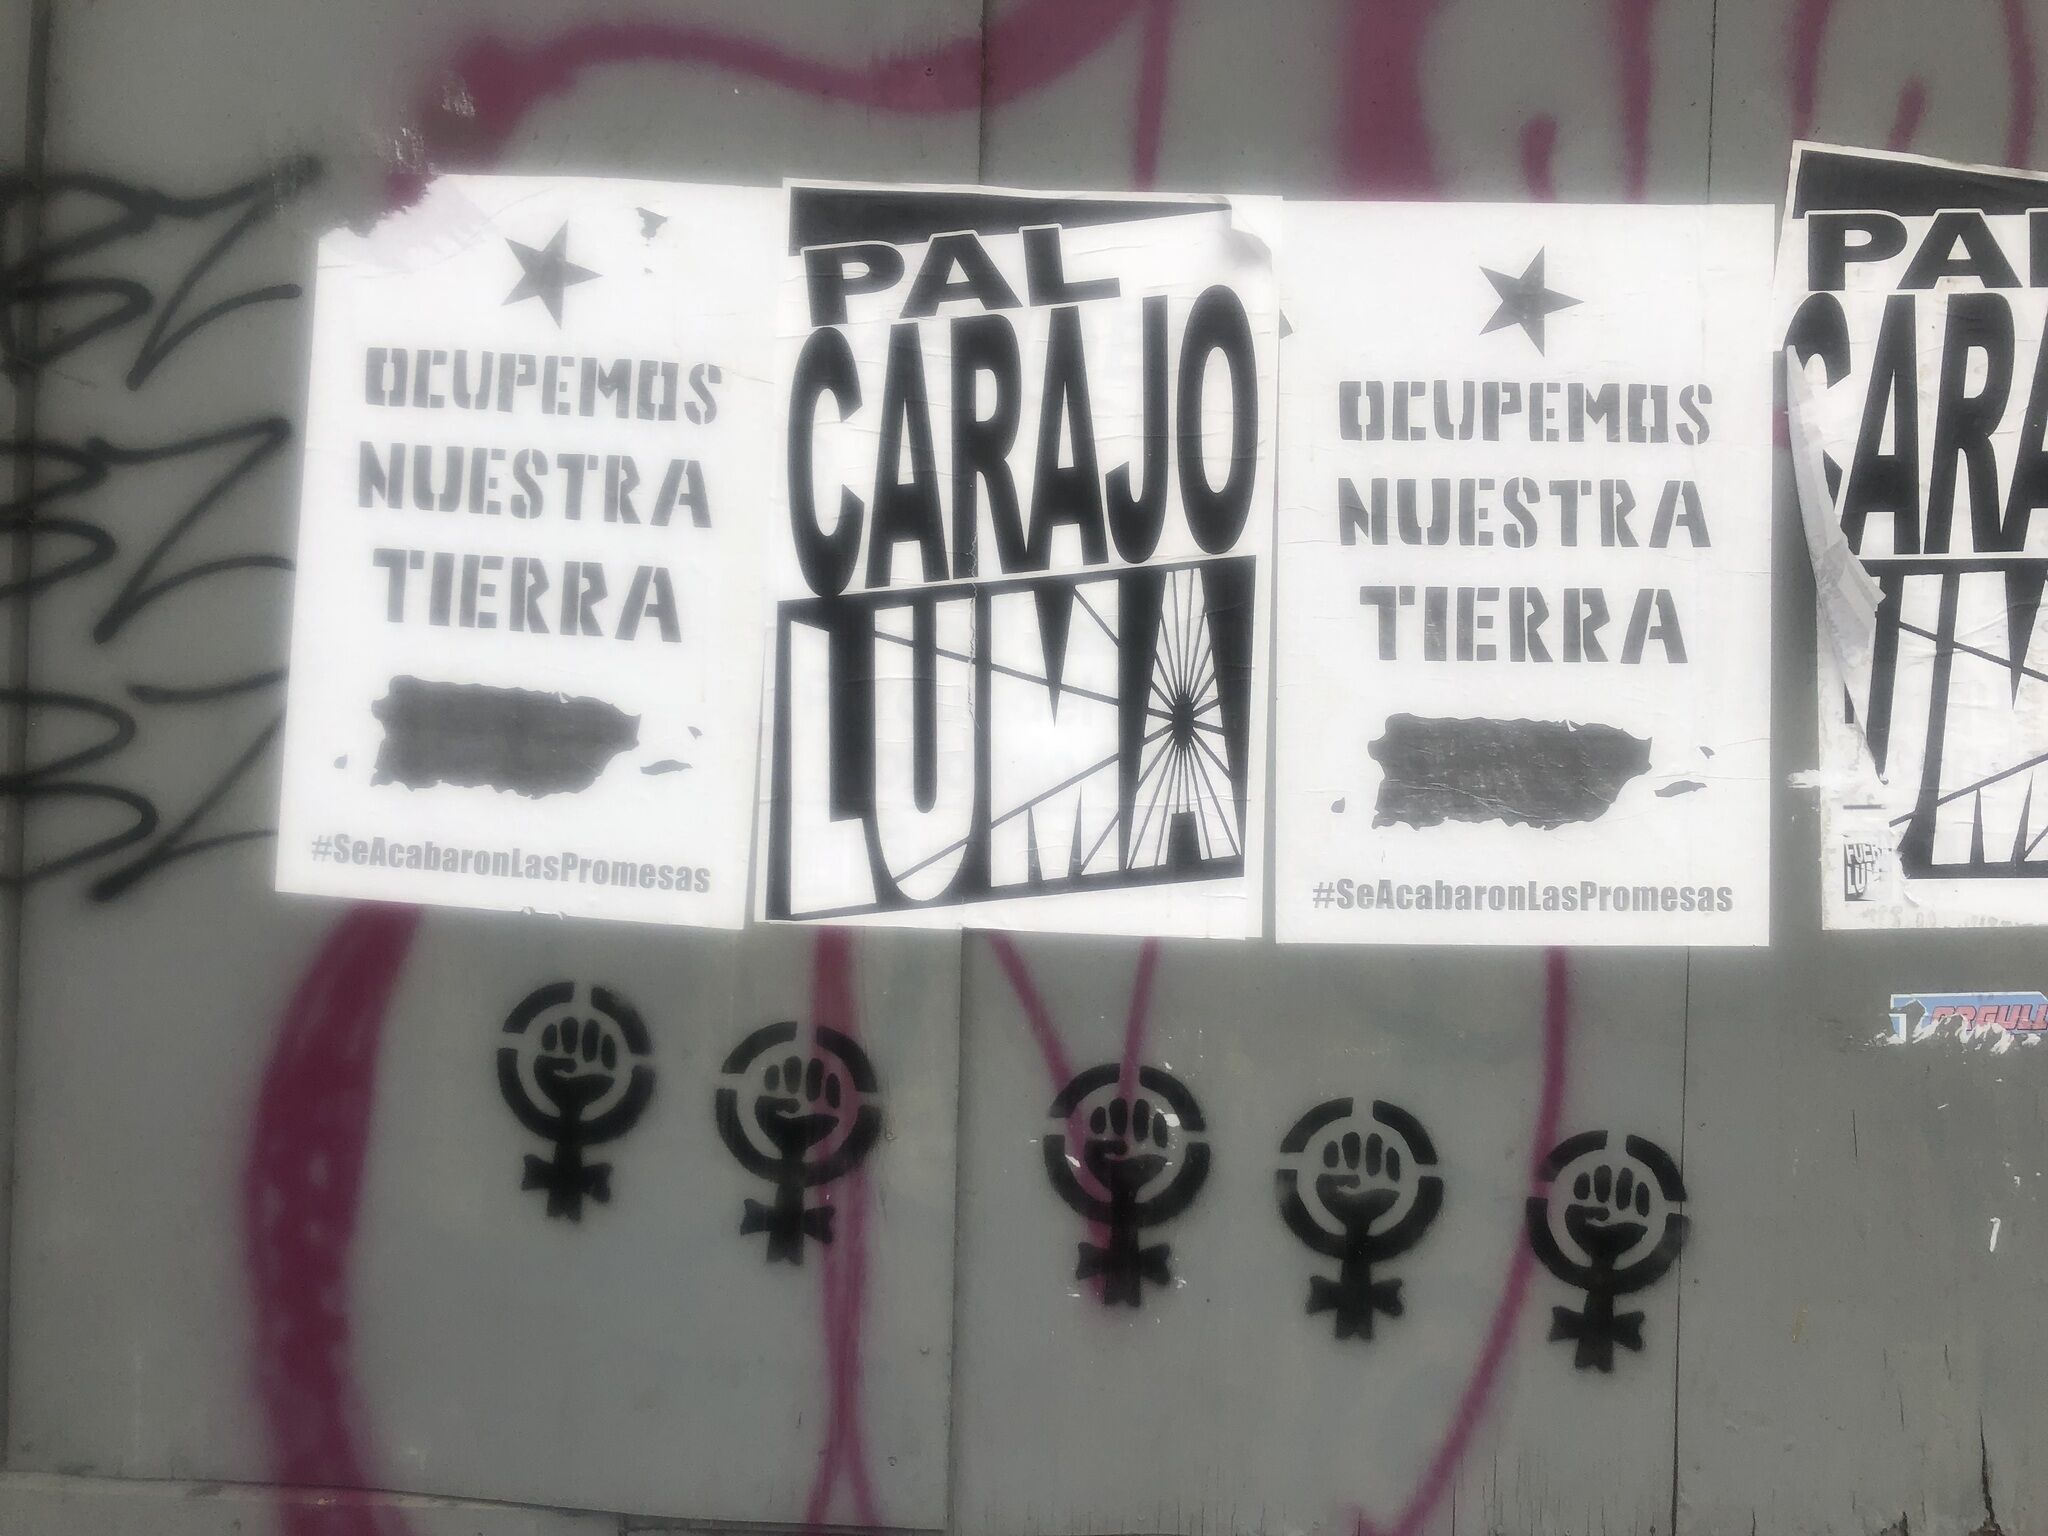 Protest posters lining wall. Two read Ocupemos Nuestra Tierra and the others read Pal Carajo Luma